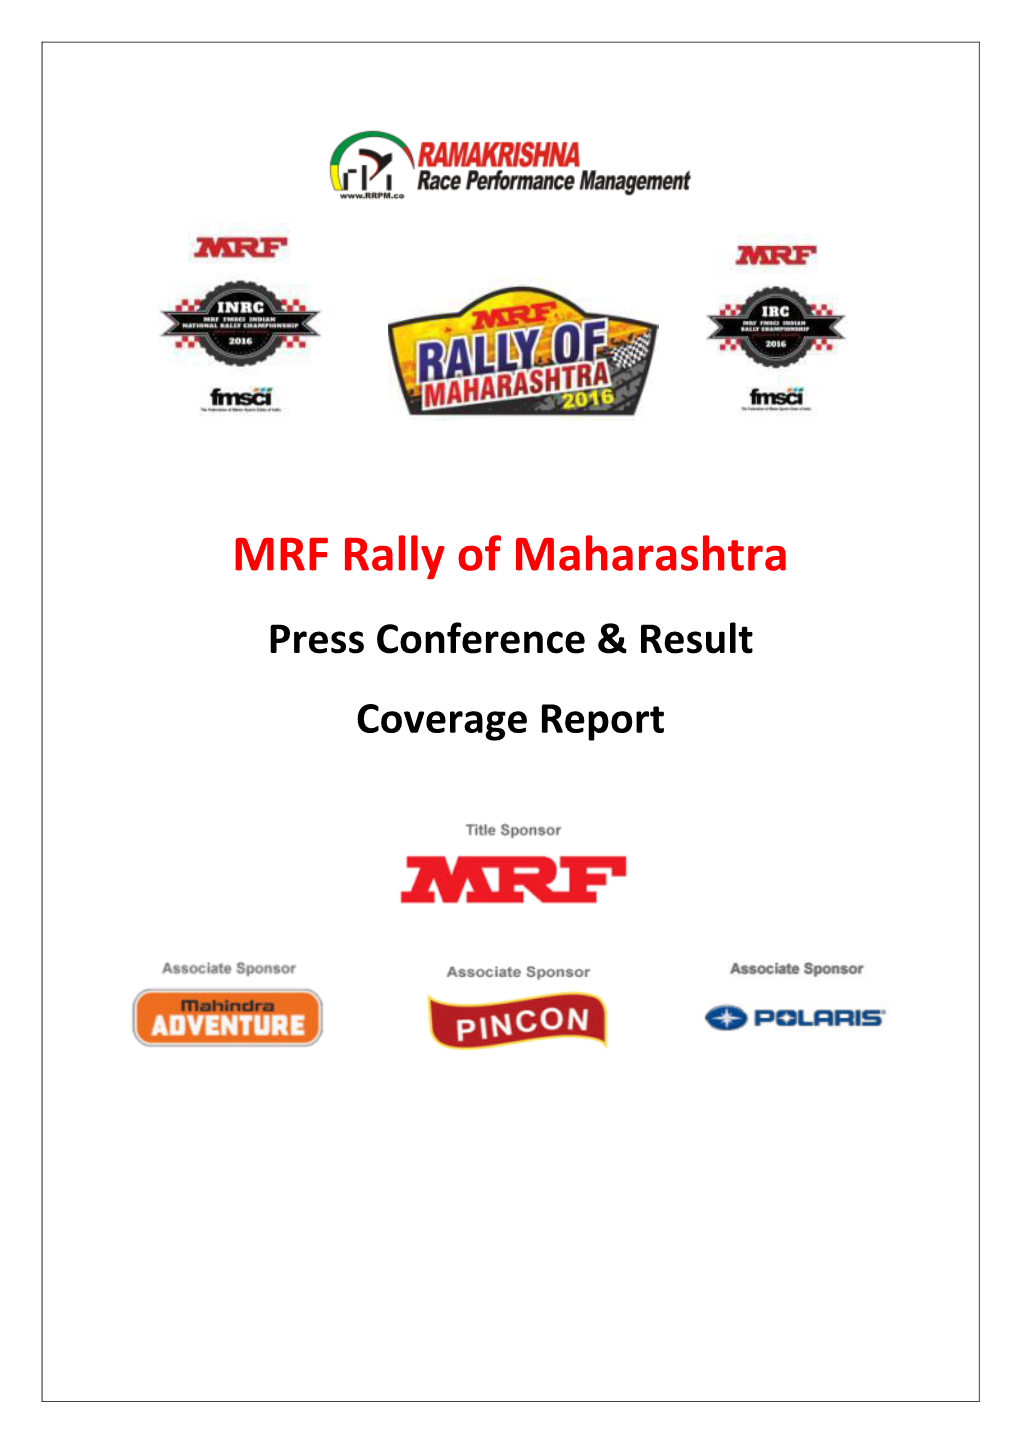 MRF Rally of Maharashtra Press Conference & Result Coverage Report